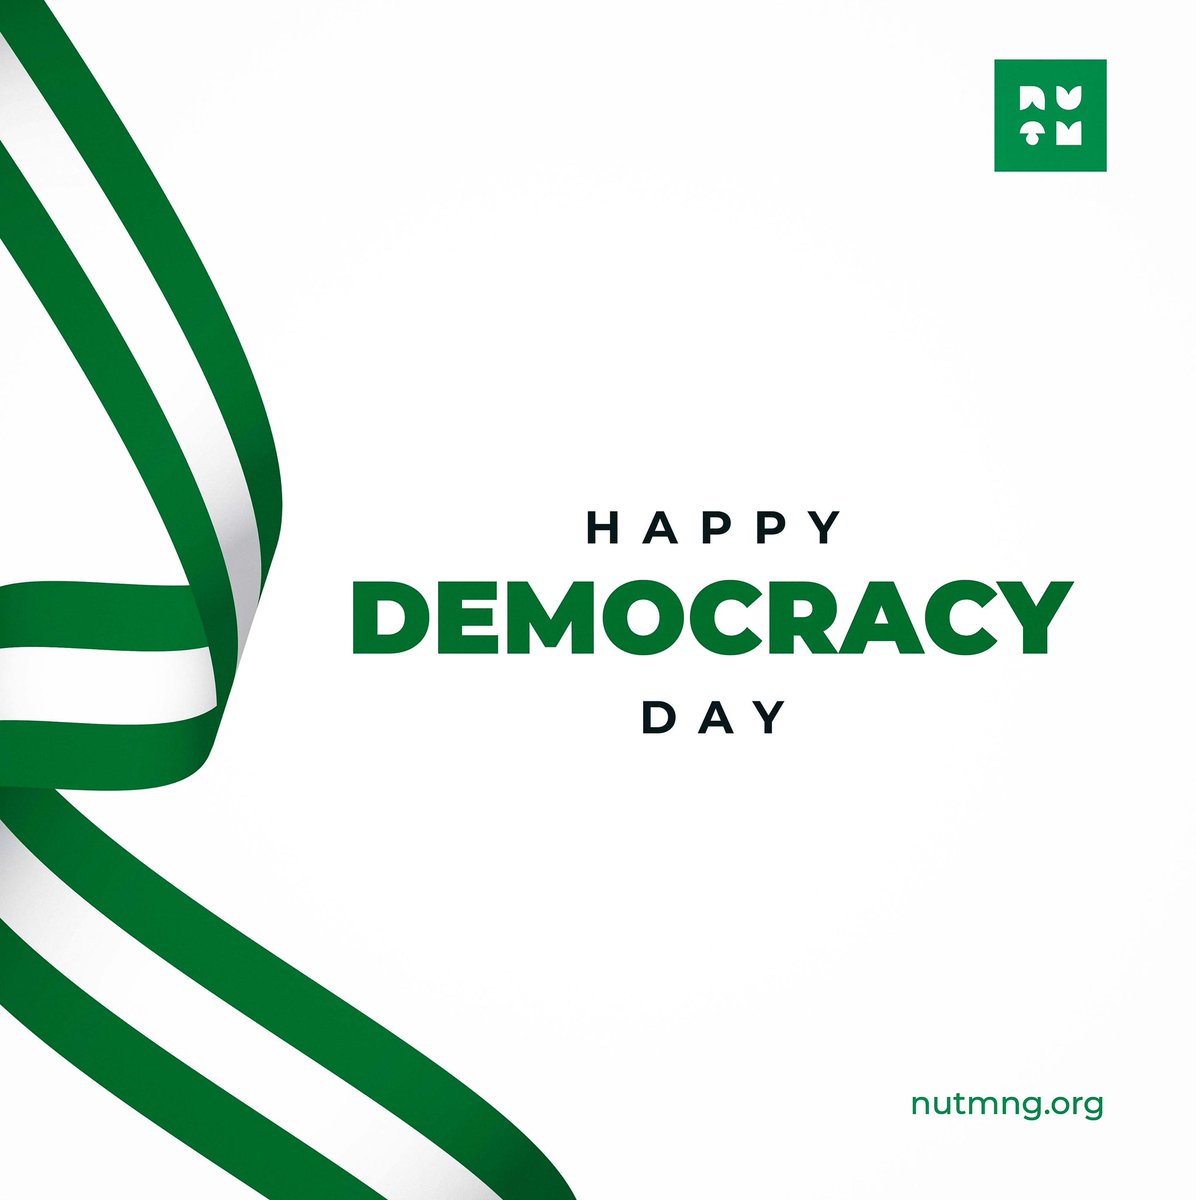 Education is the cornerstone of a thriving democracy. At NUTM, we are committed to equipping our Scholars with the knowledge, critical thinking skills, and leadership qualities they need to contribute meaningfully to Nigeria's democratic progress. 

#EmpoweringLeaders